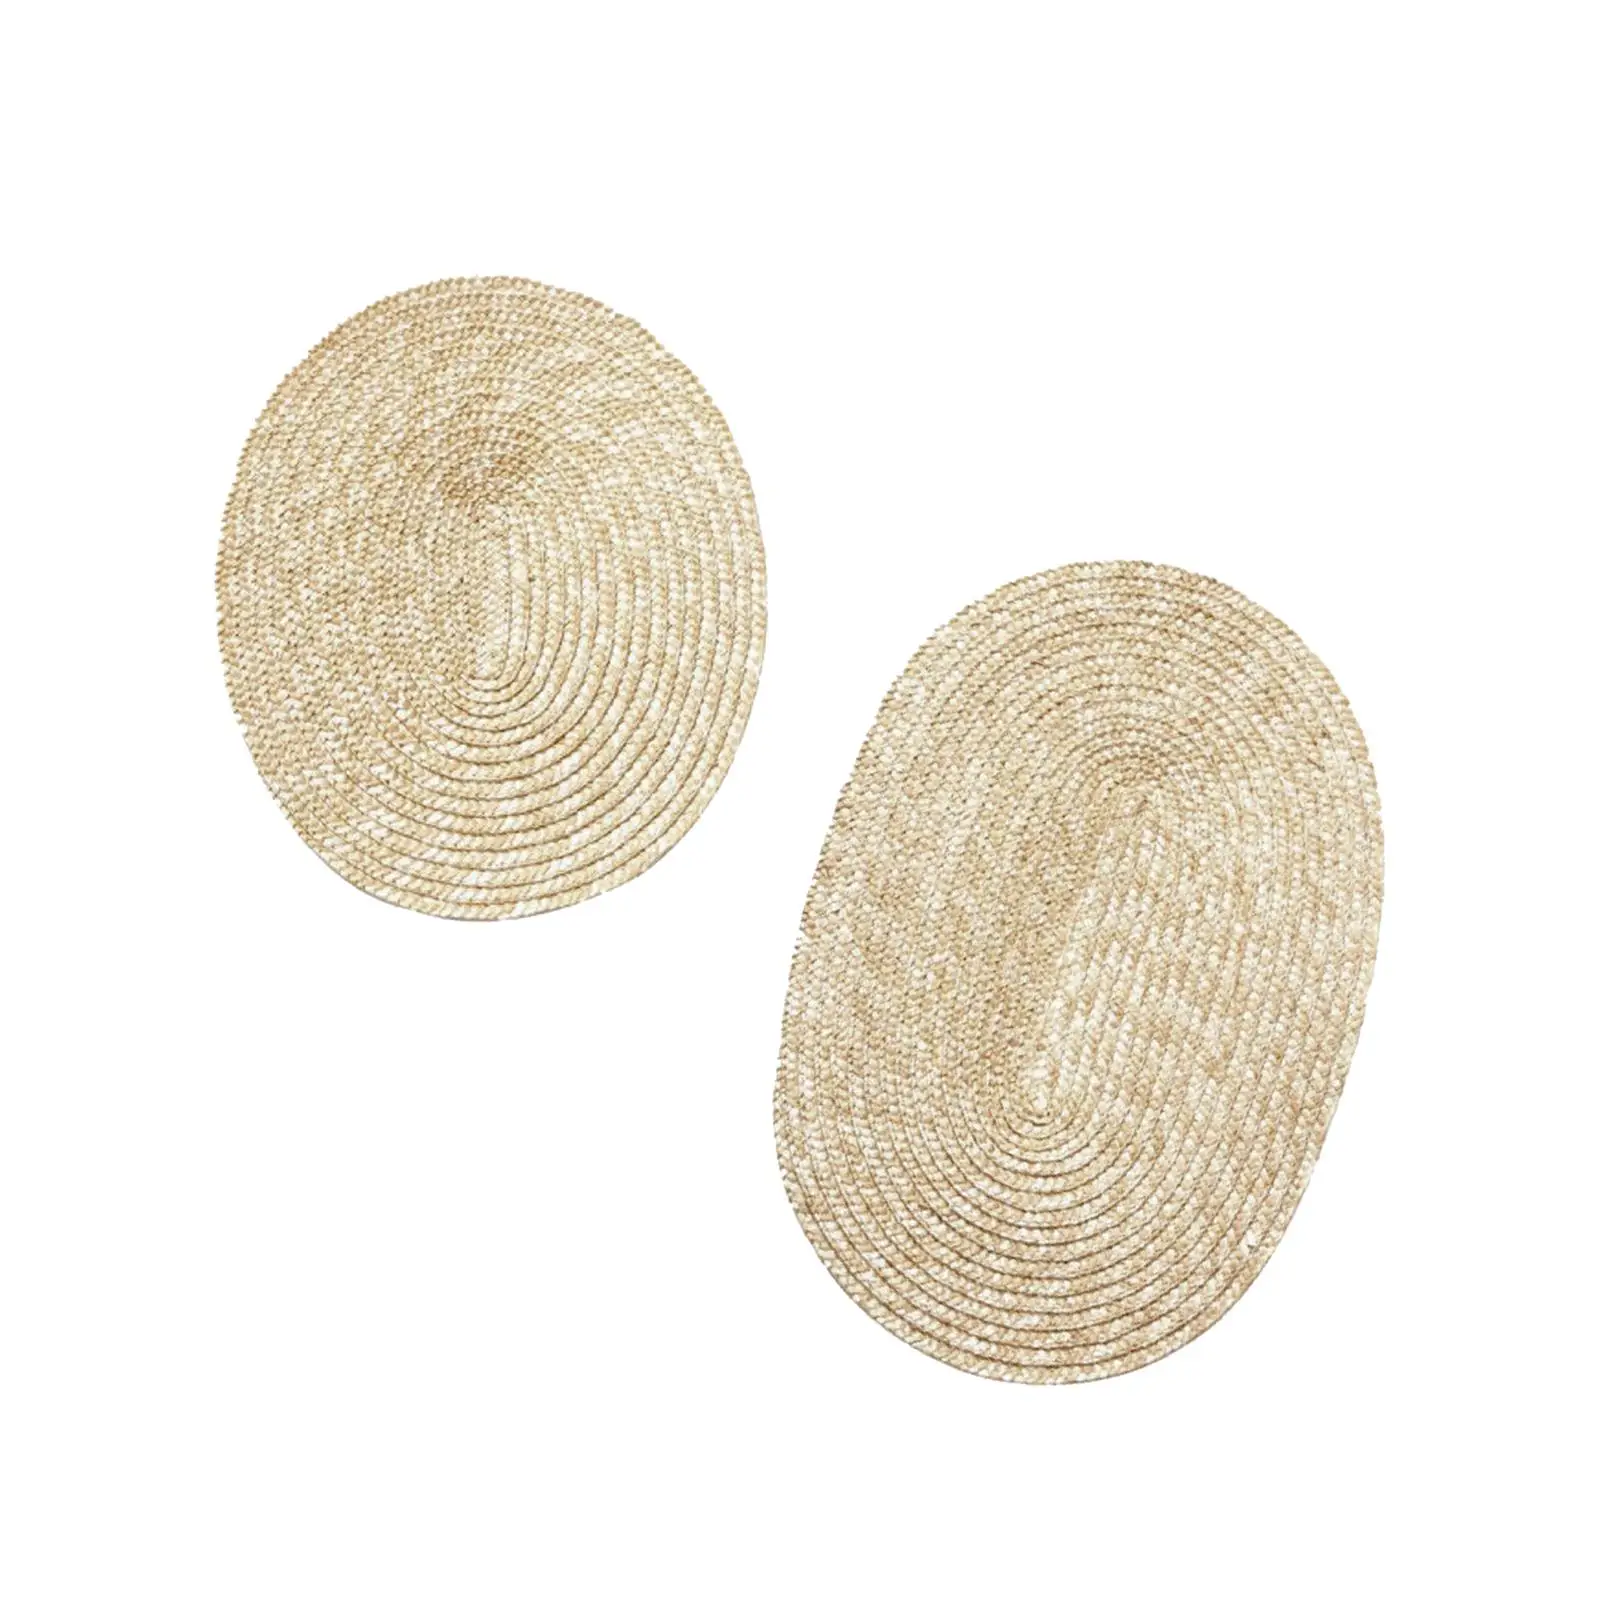 Wide Brim Hat Summer Hat Handmade Sun Protection Floppy Straw Hats for Garden Hiking Fishing Casual Travel Summer Outdoor